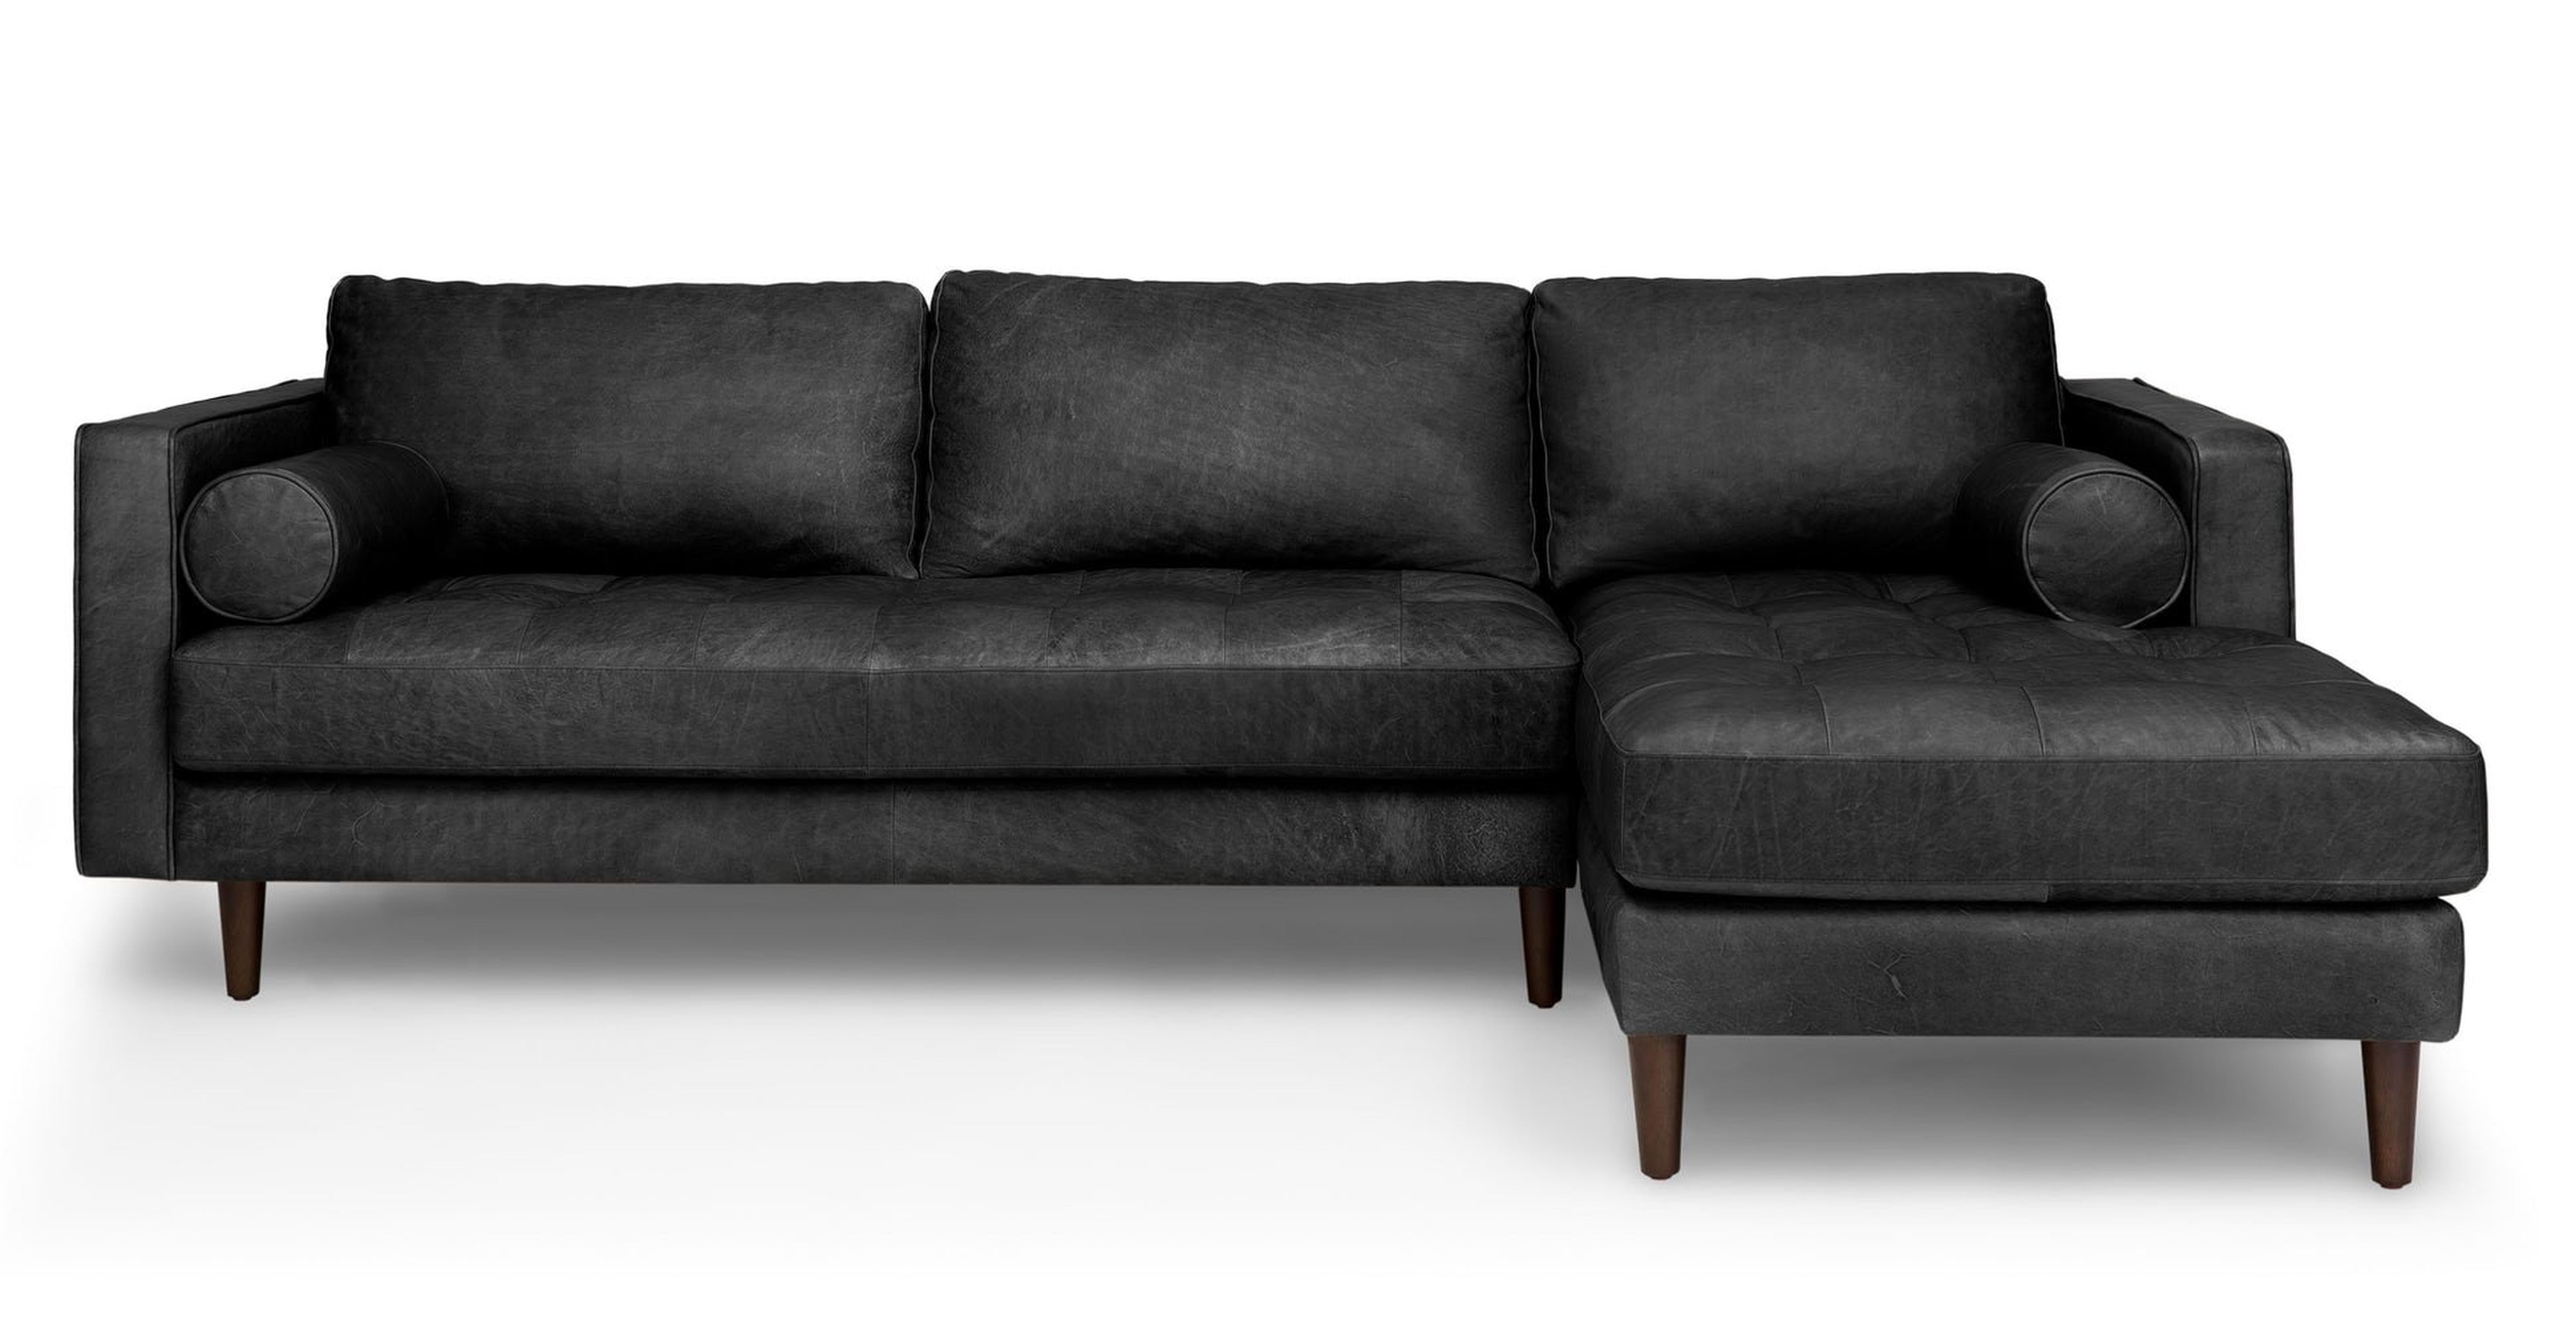 Sven Oxford Black Right Sectional Sofa - Article